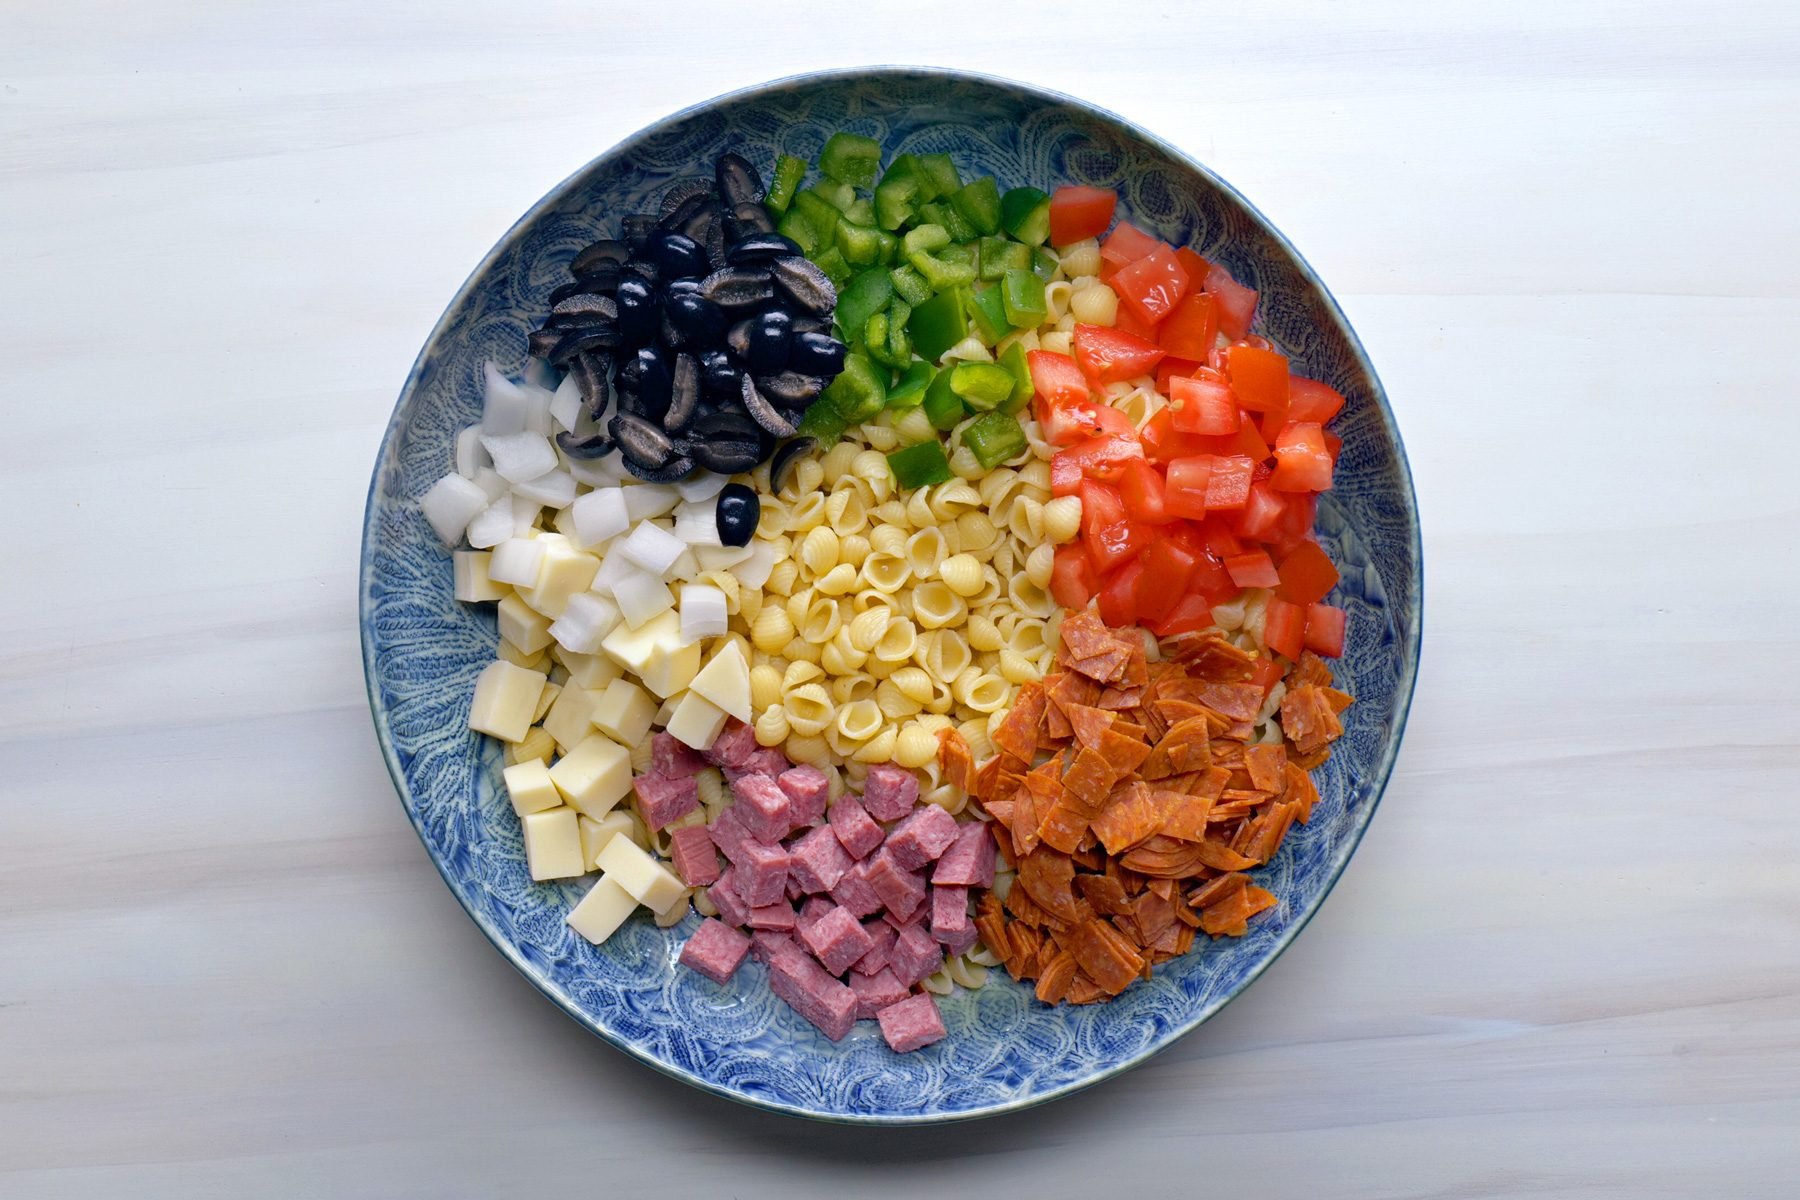 Ingredients including capsicum, pasta, tomatoes, meat, olives for Italian pasta salad in a plate